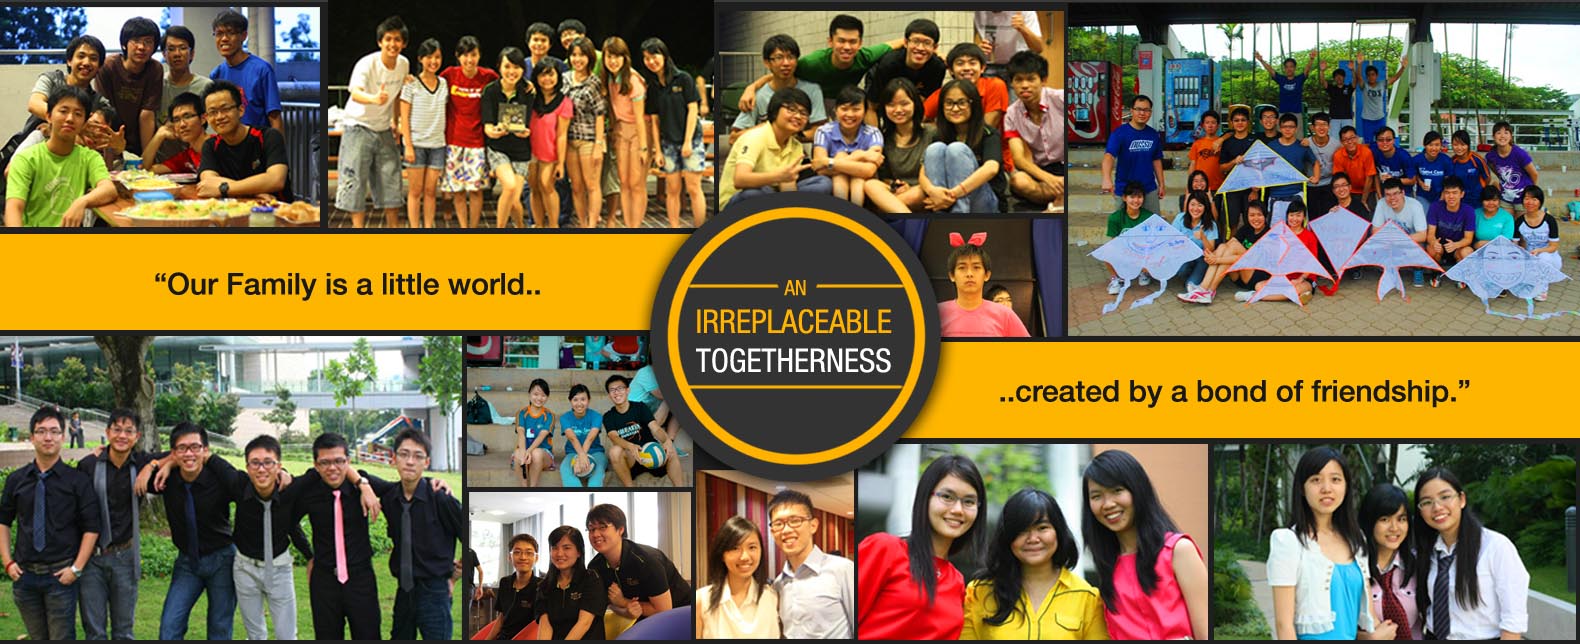 An irreplaceable togetherness: Our Family is a little world created by a bond of friendship